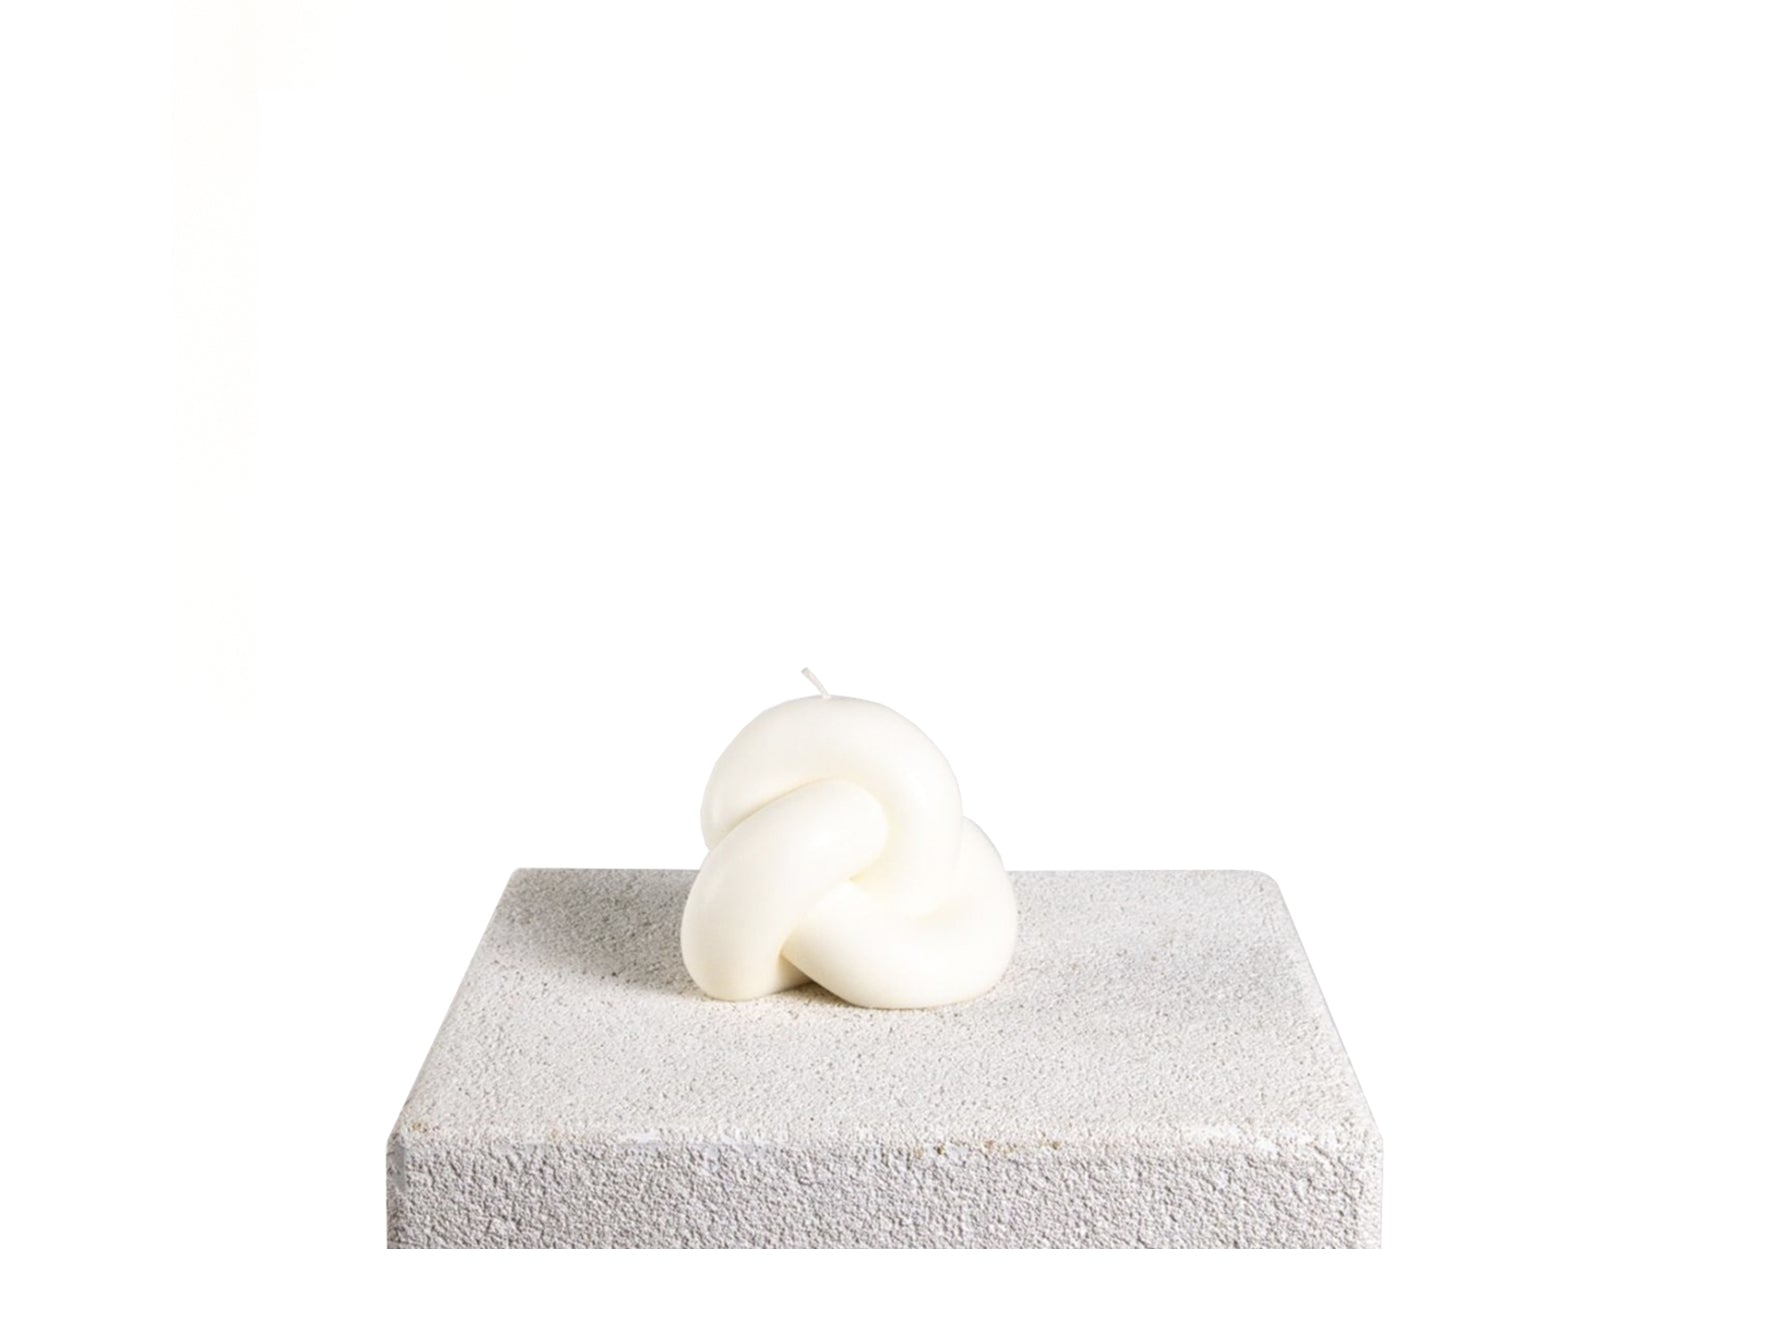 Jumbo Knot Sculptural Soy Wax Candle